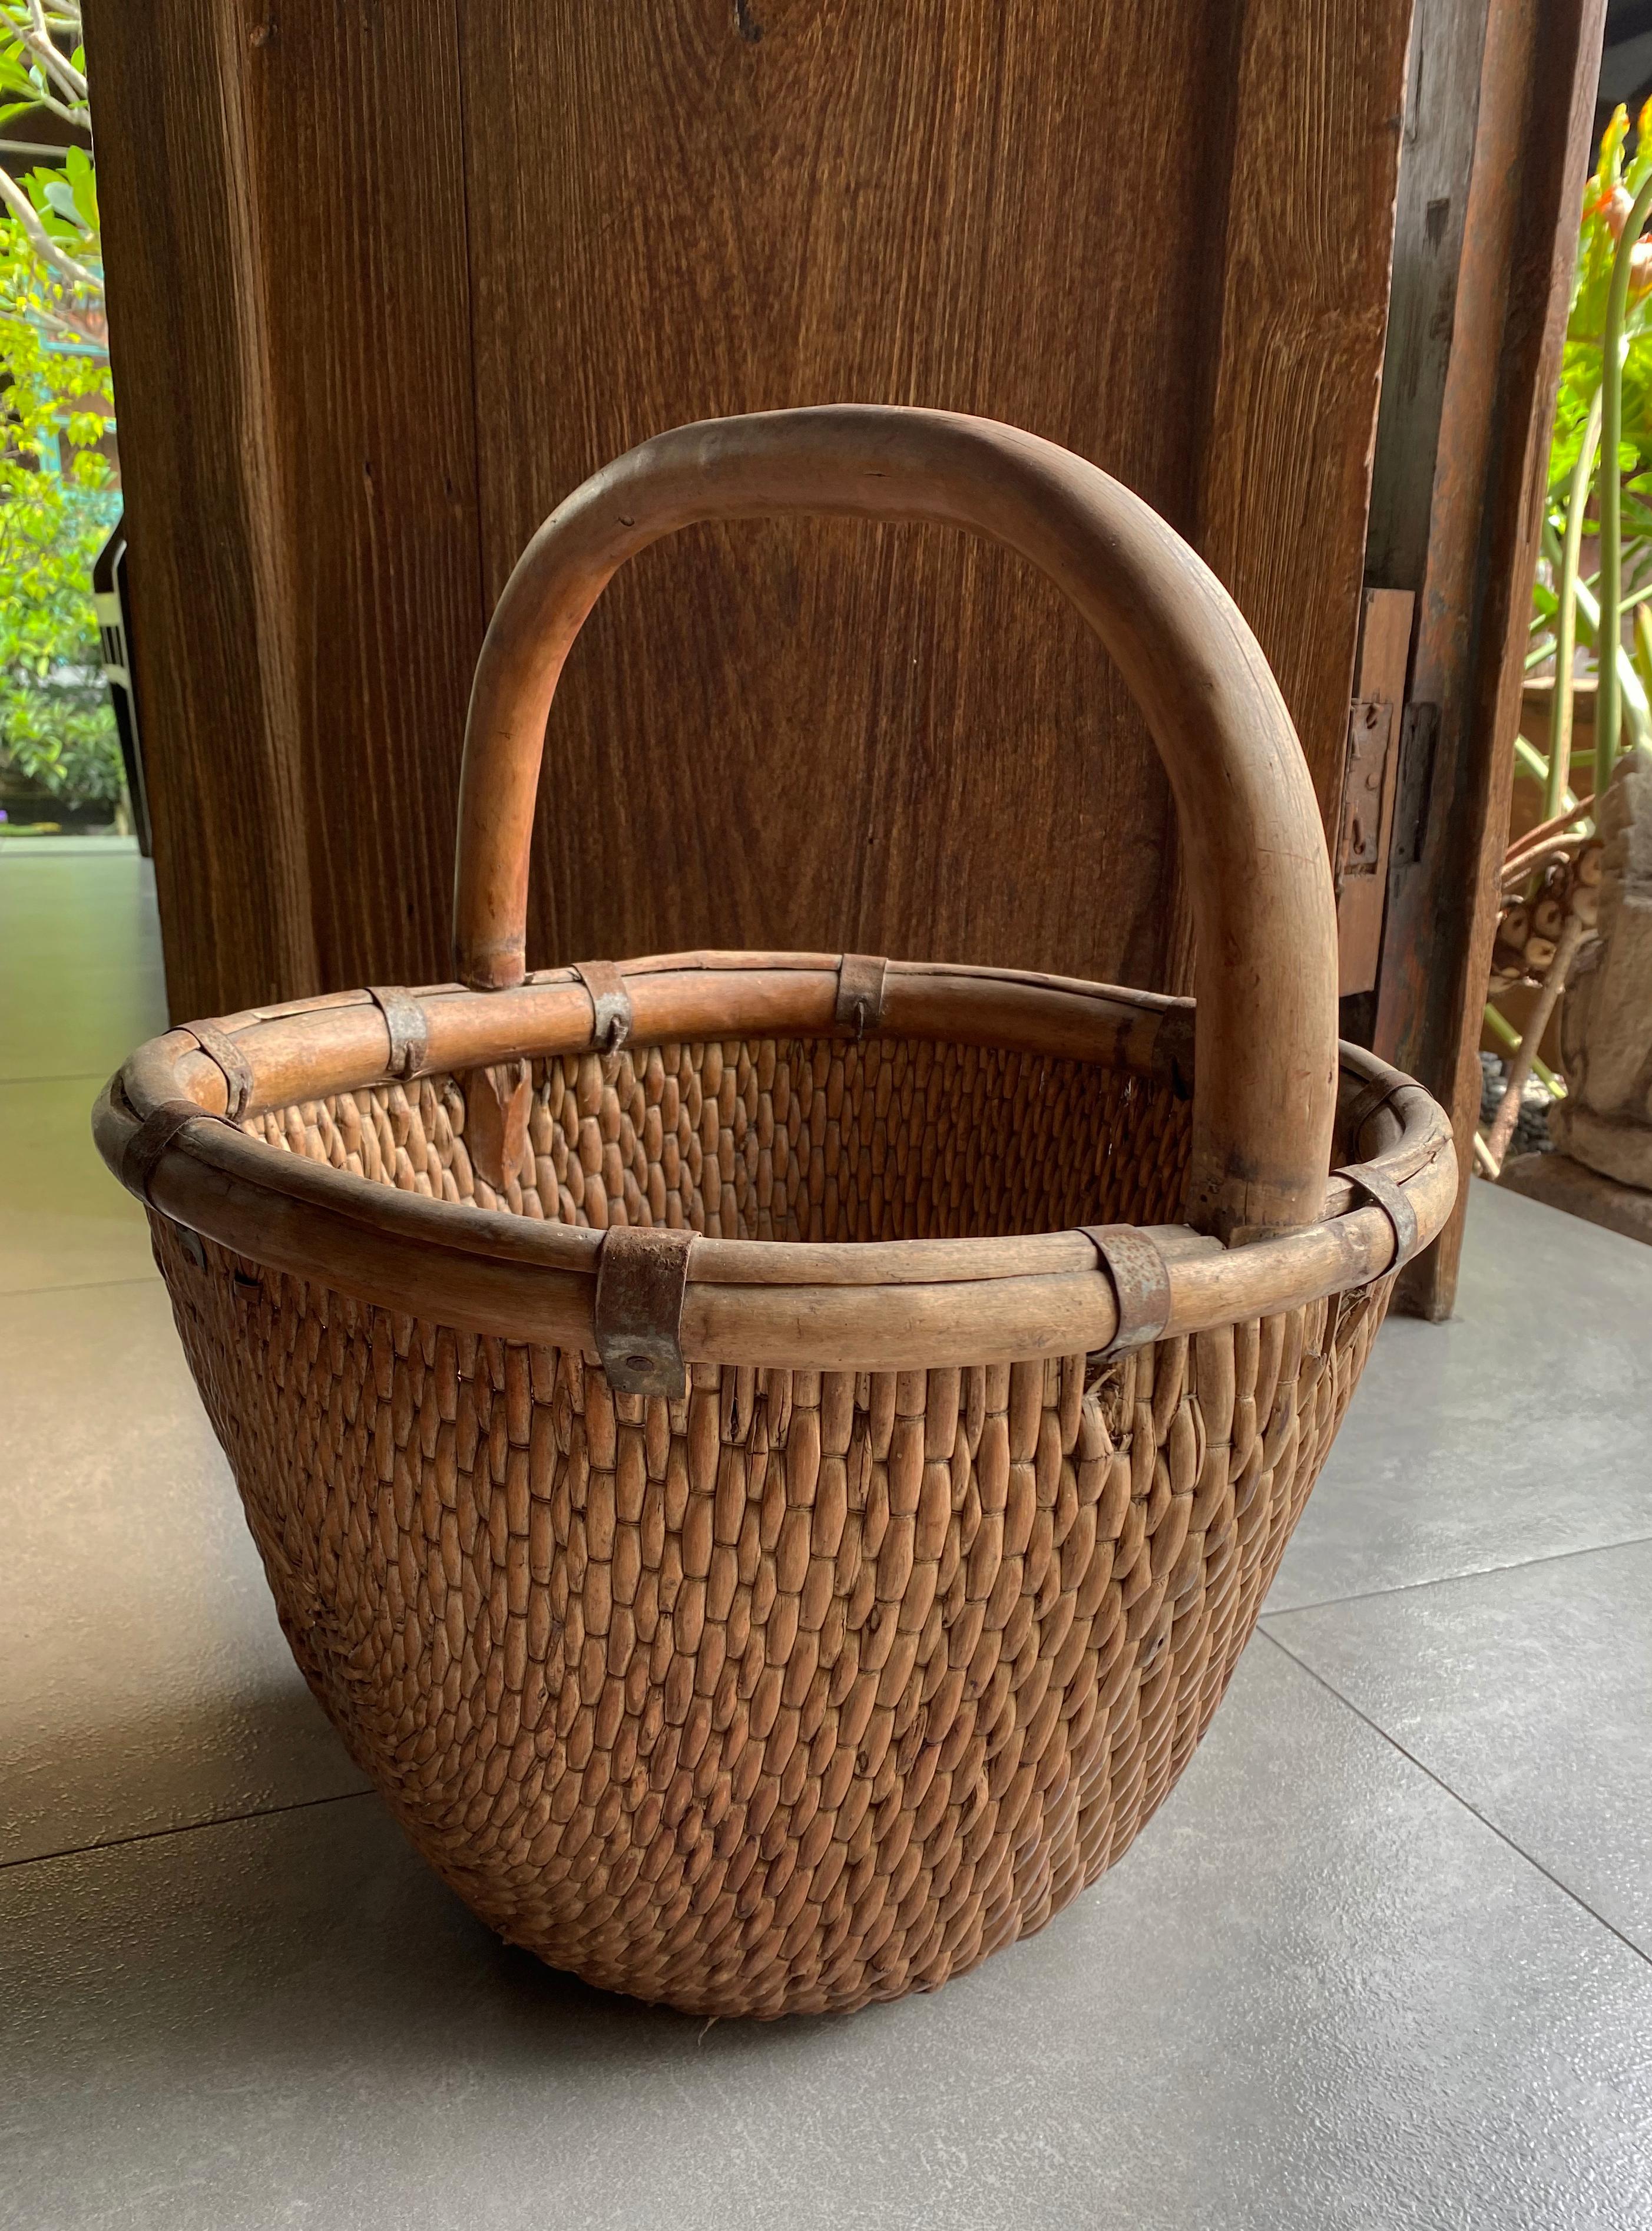 This basket is made from a wooden frame and woven willow reeds originating from China's Shanxi Provence. Used to carry grains the frame and smooth textured handle feature original iron clamps. 

Dimensions: Height to Handle 47.5cm / Height 27.5cm